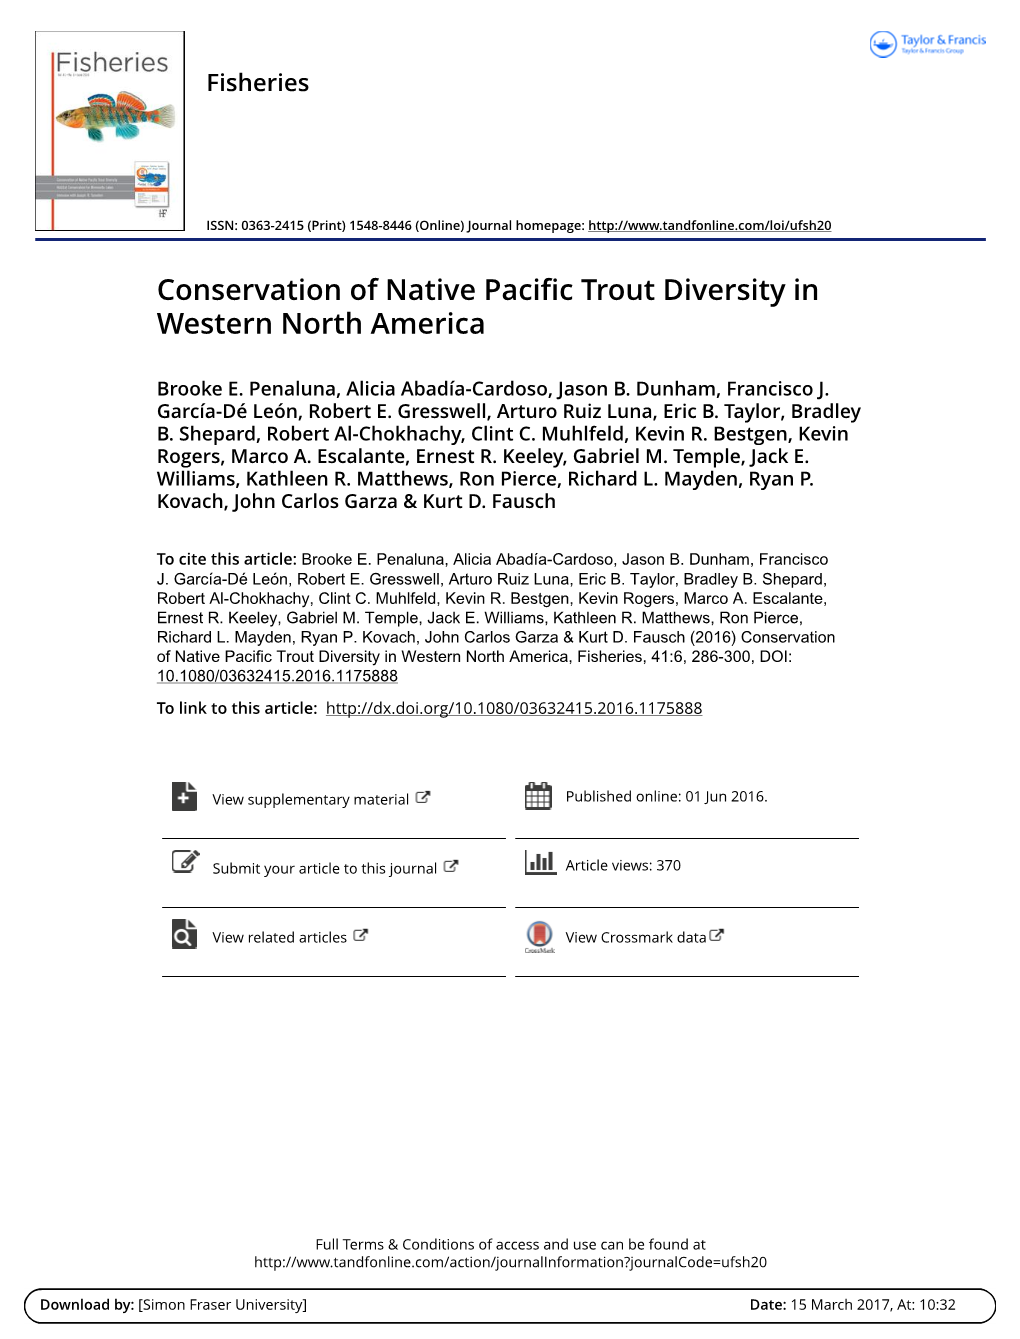 Conservation of Native Pacific Trout Diversity in Western North America